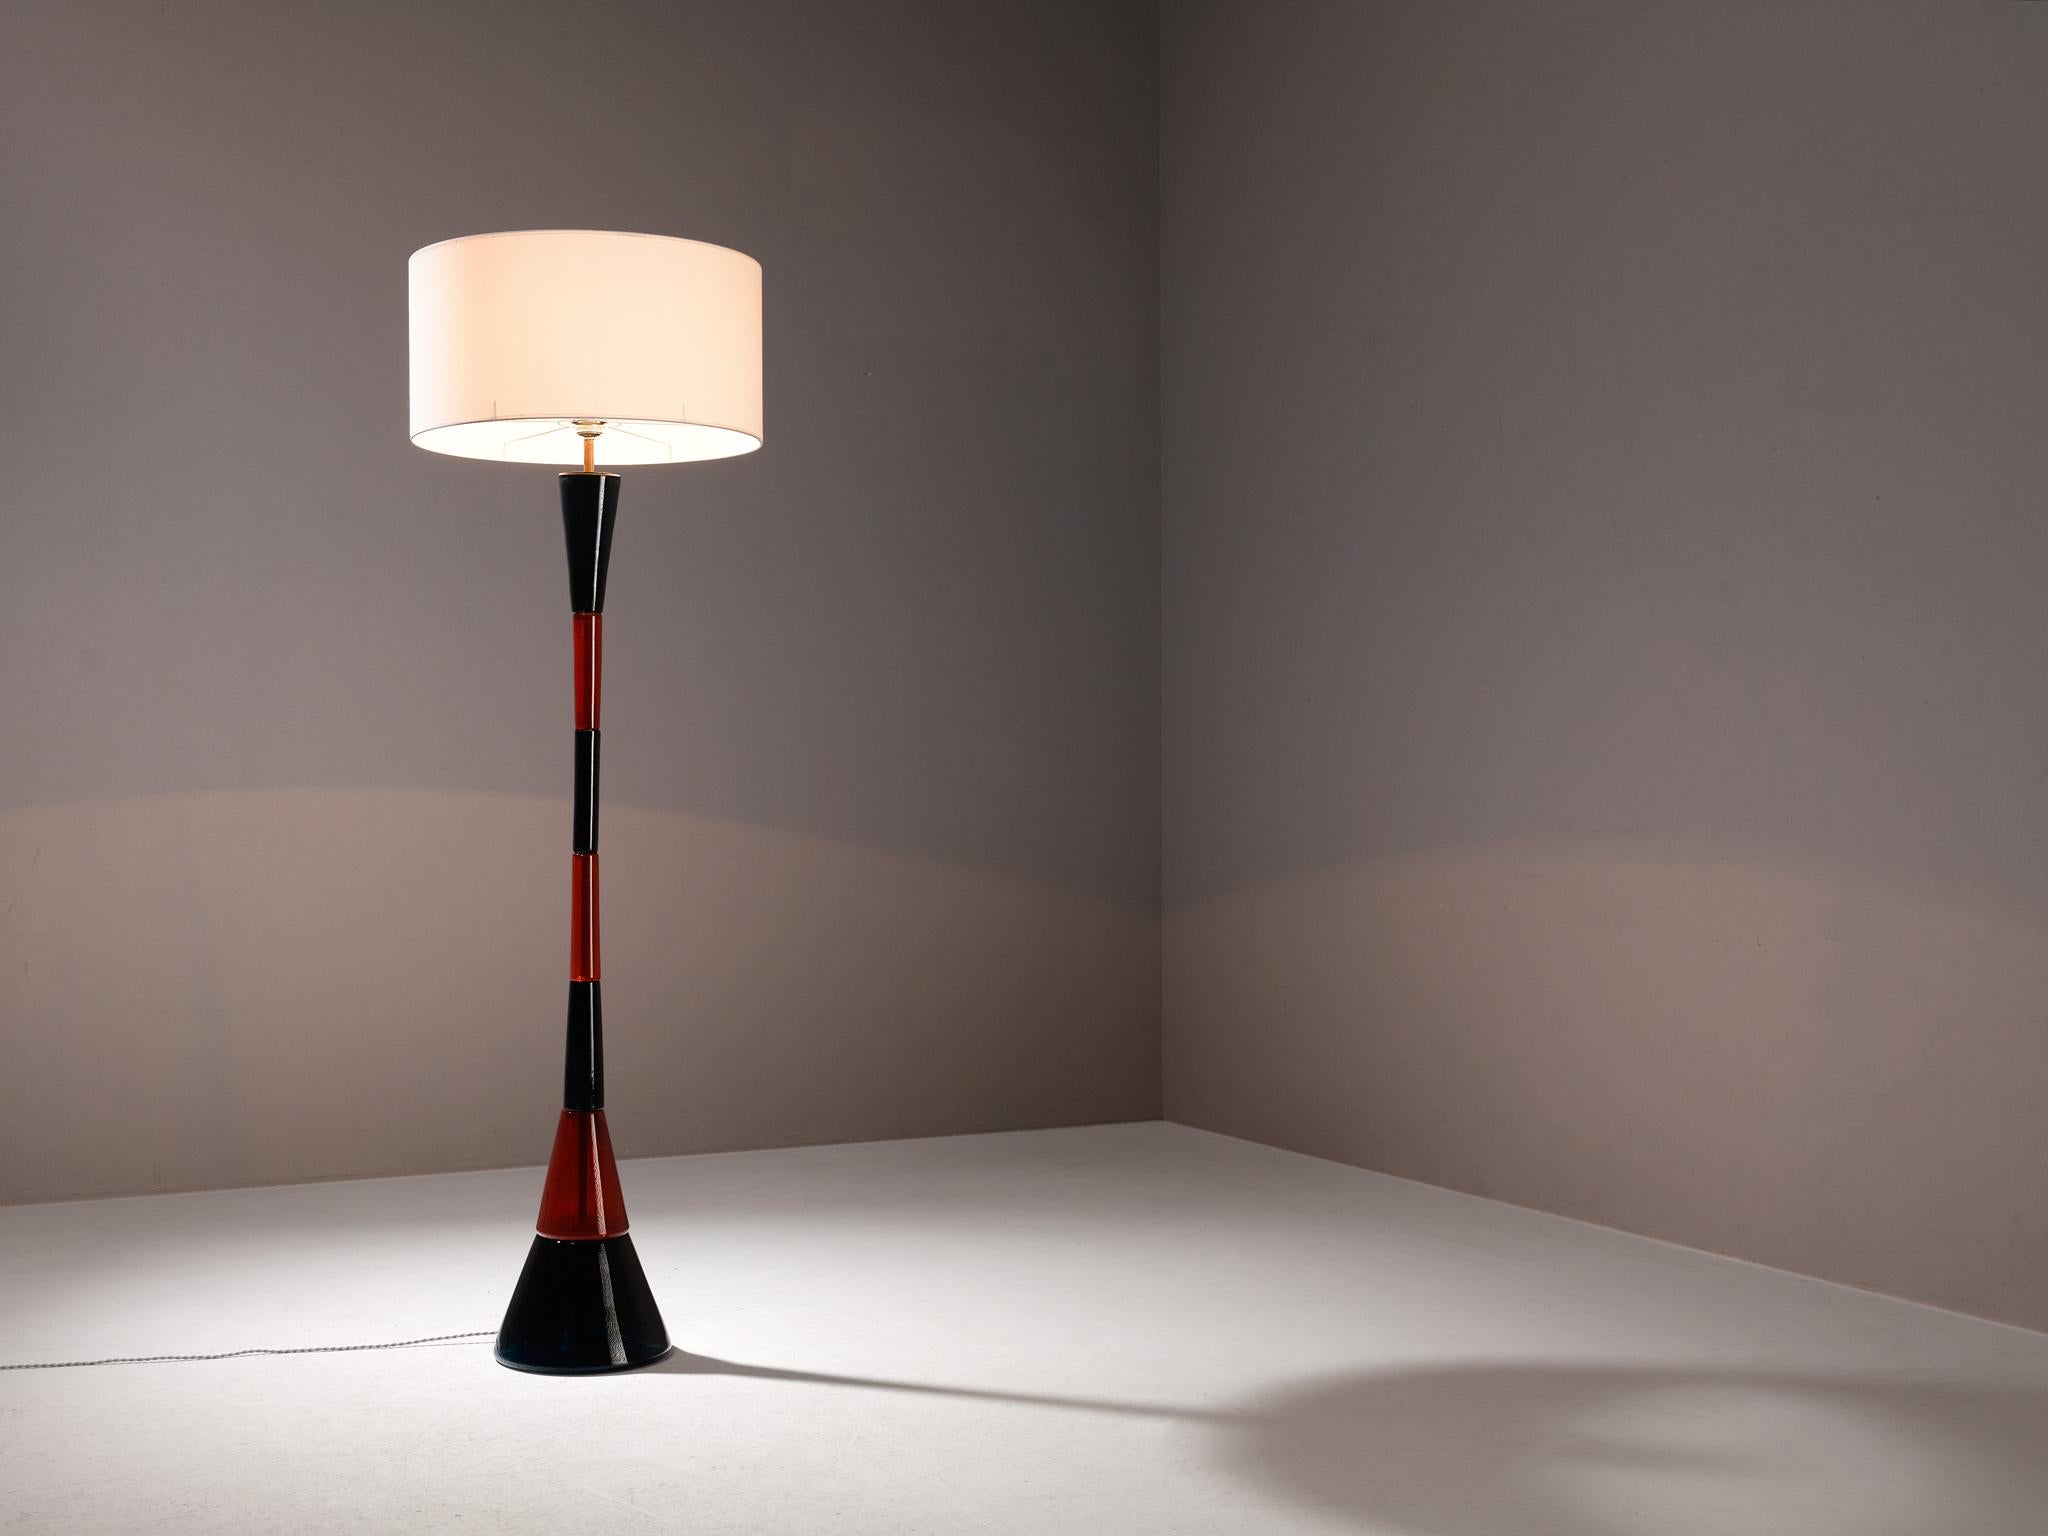 Fulvio Bianconi for Venini, floor lamp, glass, Italy, circa 1960

A truly magnificent Italian floor lamp designed by the multidisciplinary artist Fulvio Bianconi (1915-1996) for the esteemed glass company Venini where he worked on free-lance basis.